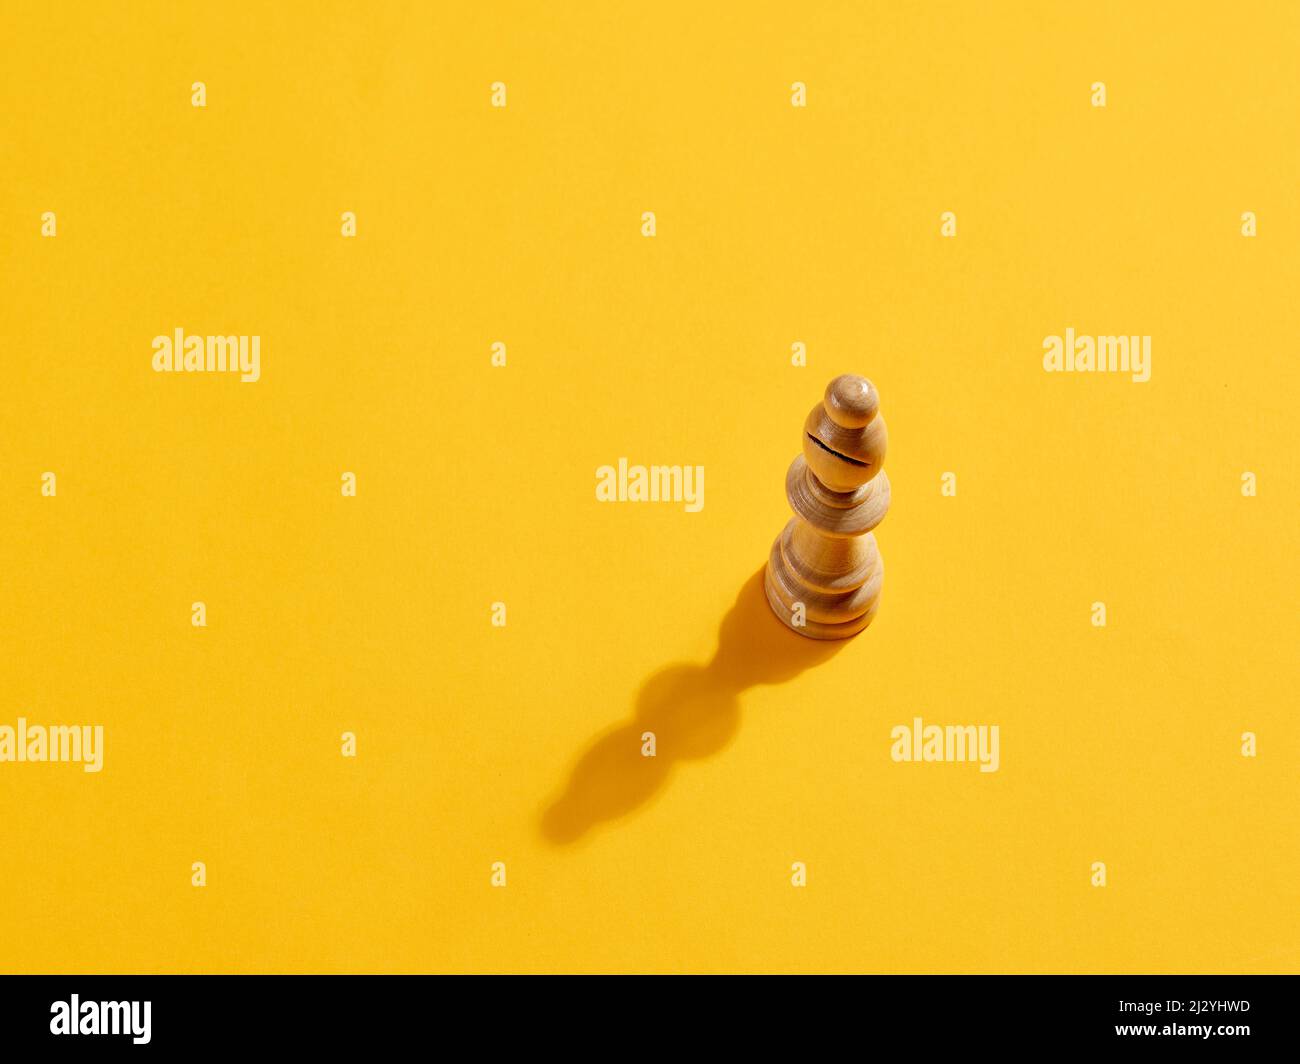 Bishop or elephant chess piece on yellow background with copy space. Stock Photo